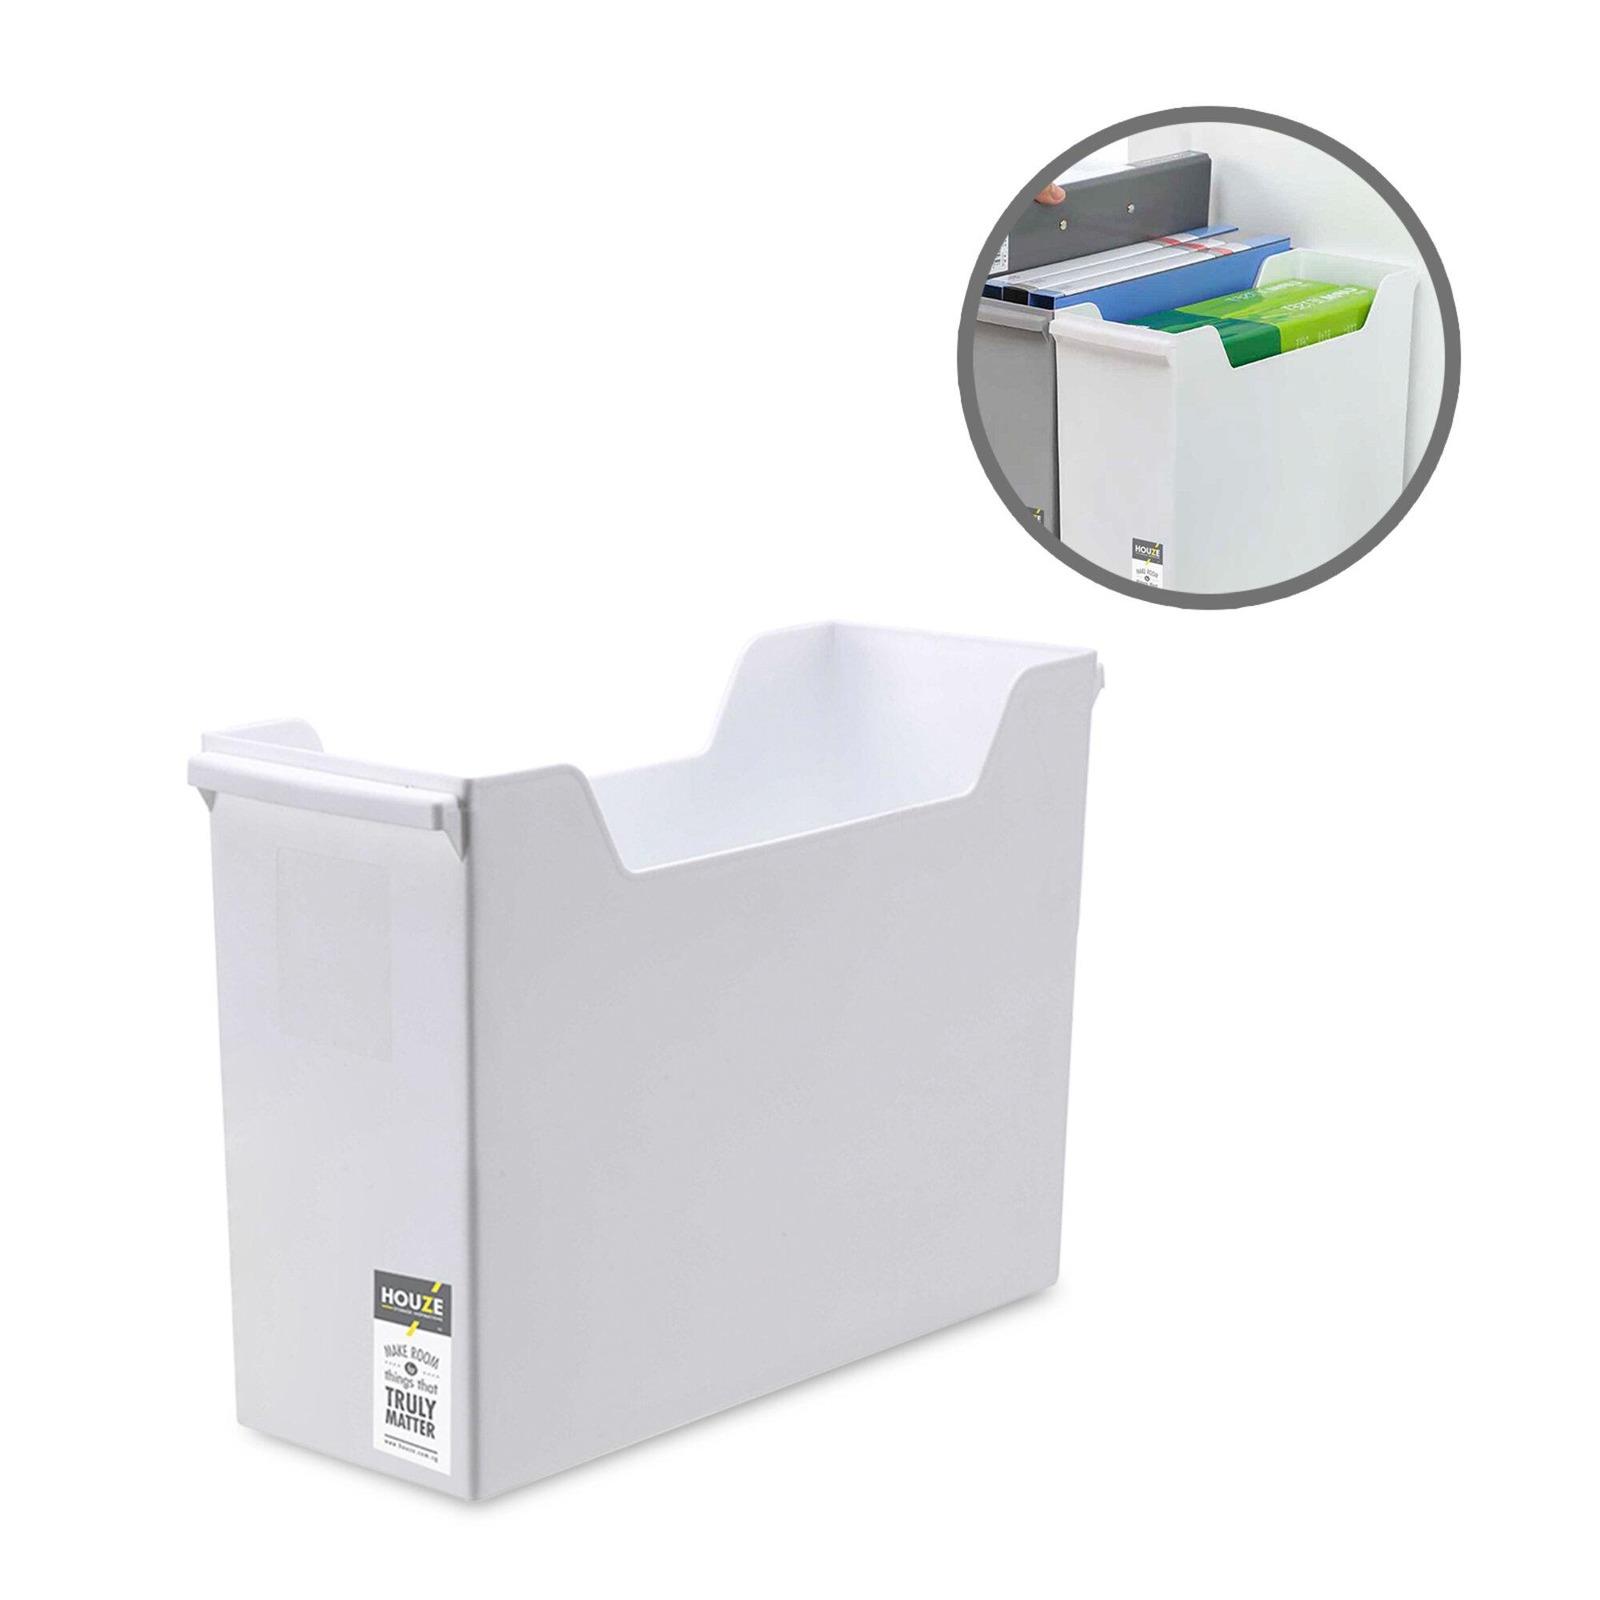 Houze Portable All-In-One File Box - Small